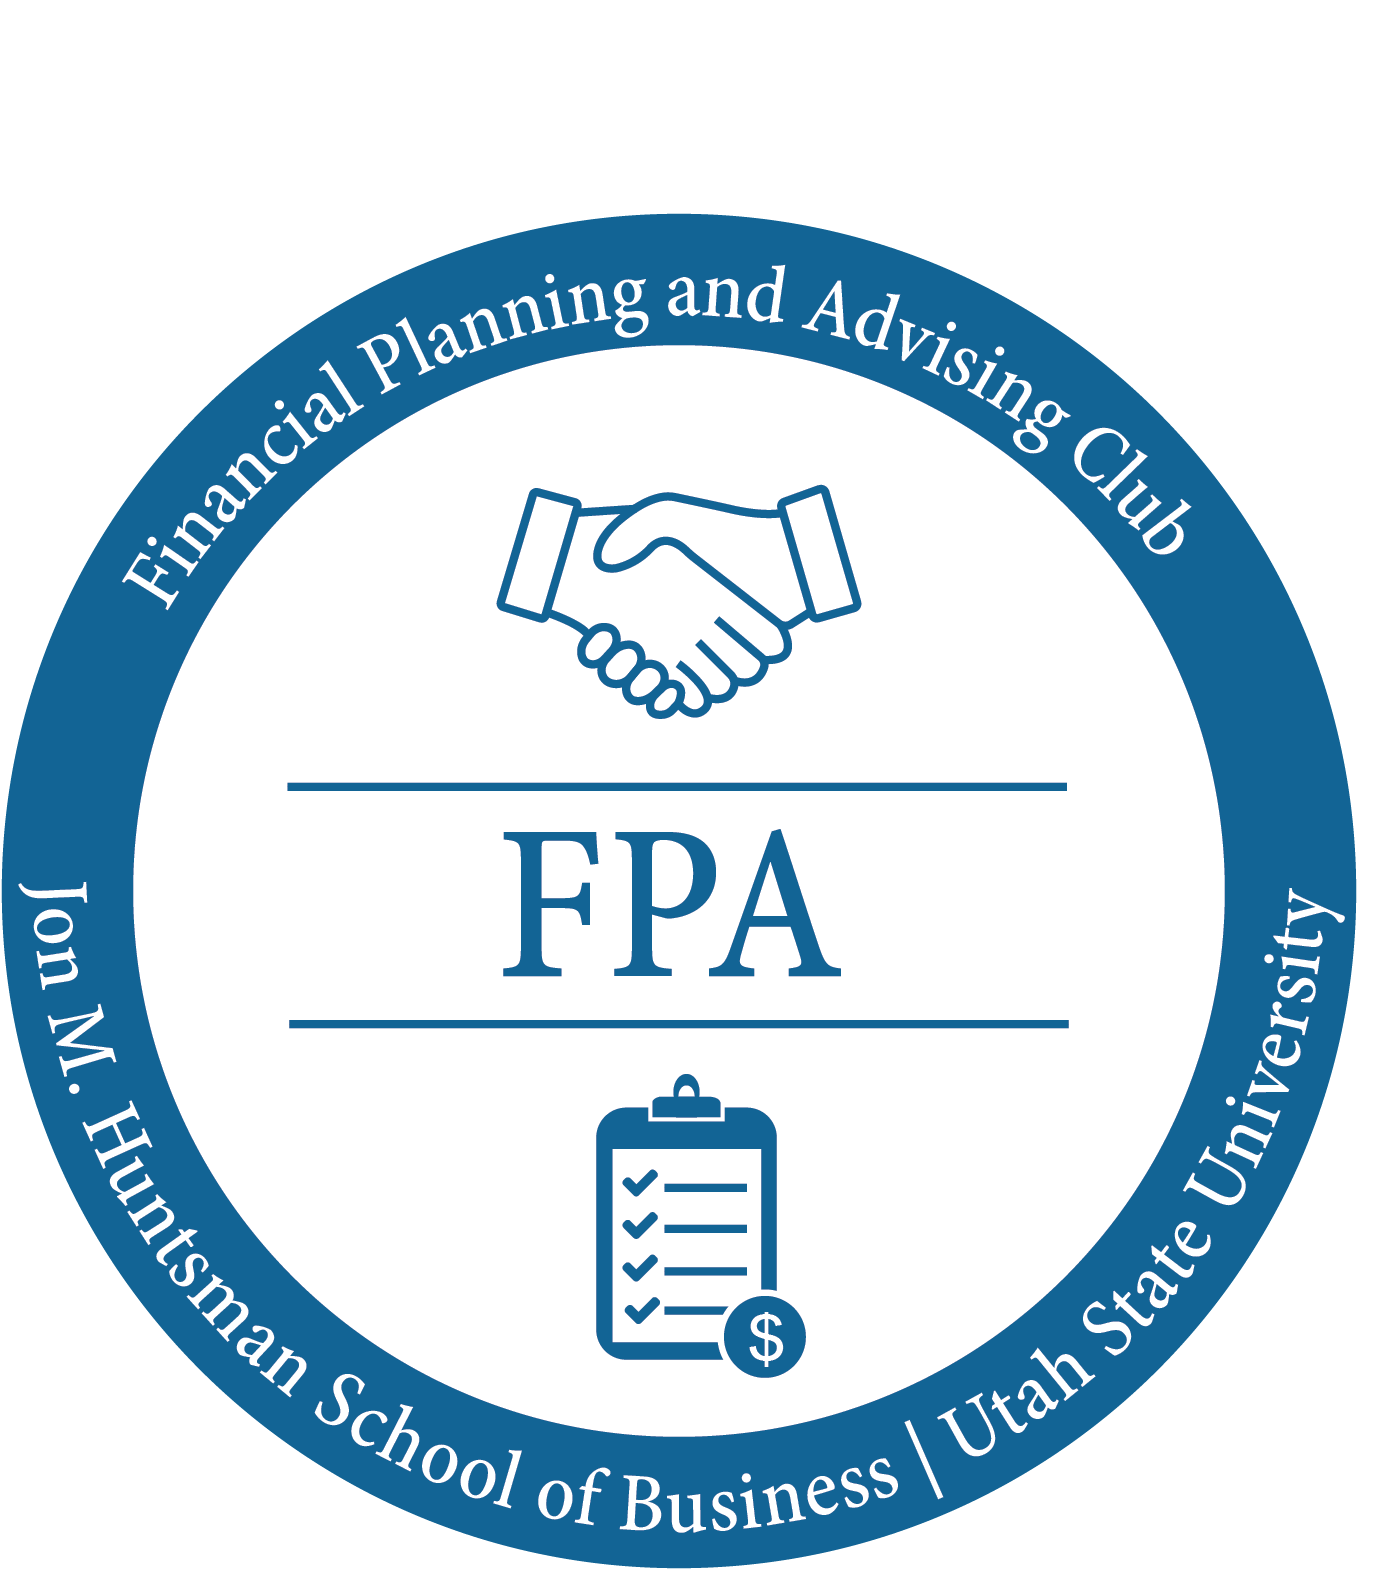 Financial Planning and Advising Club (FPA)